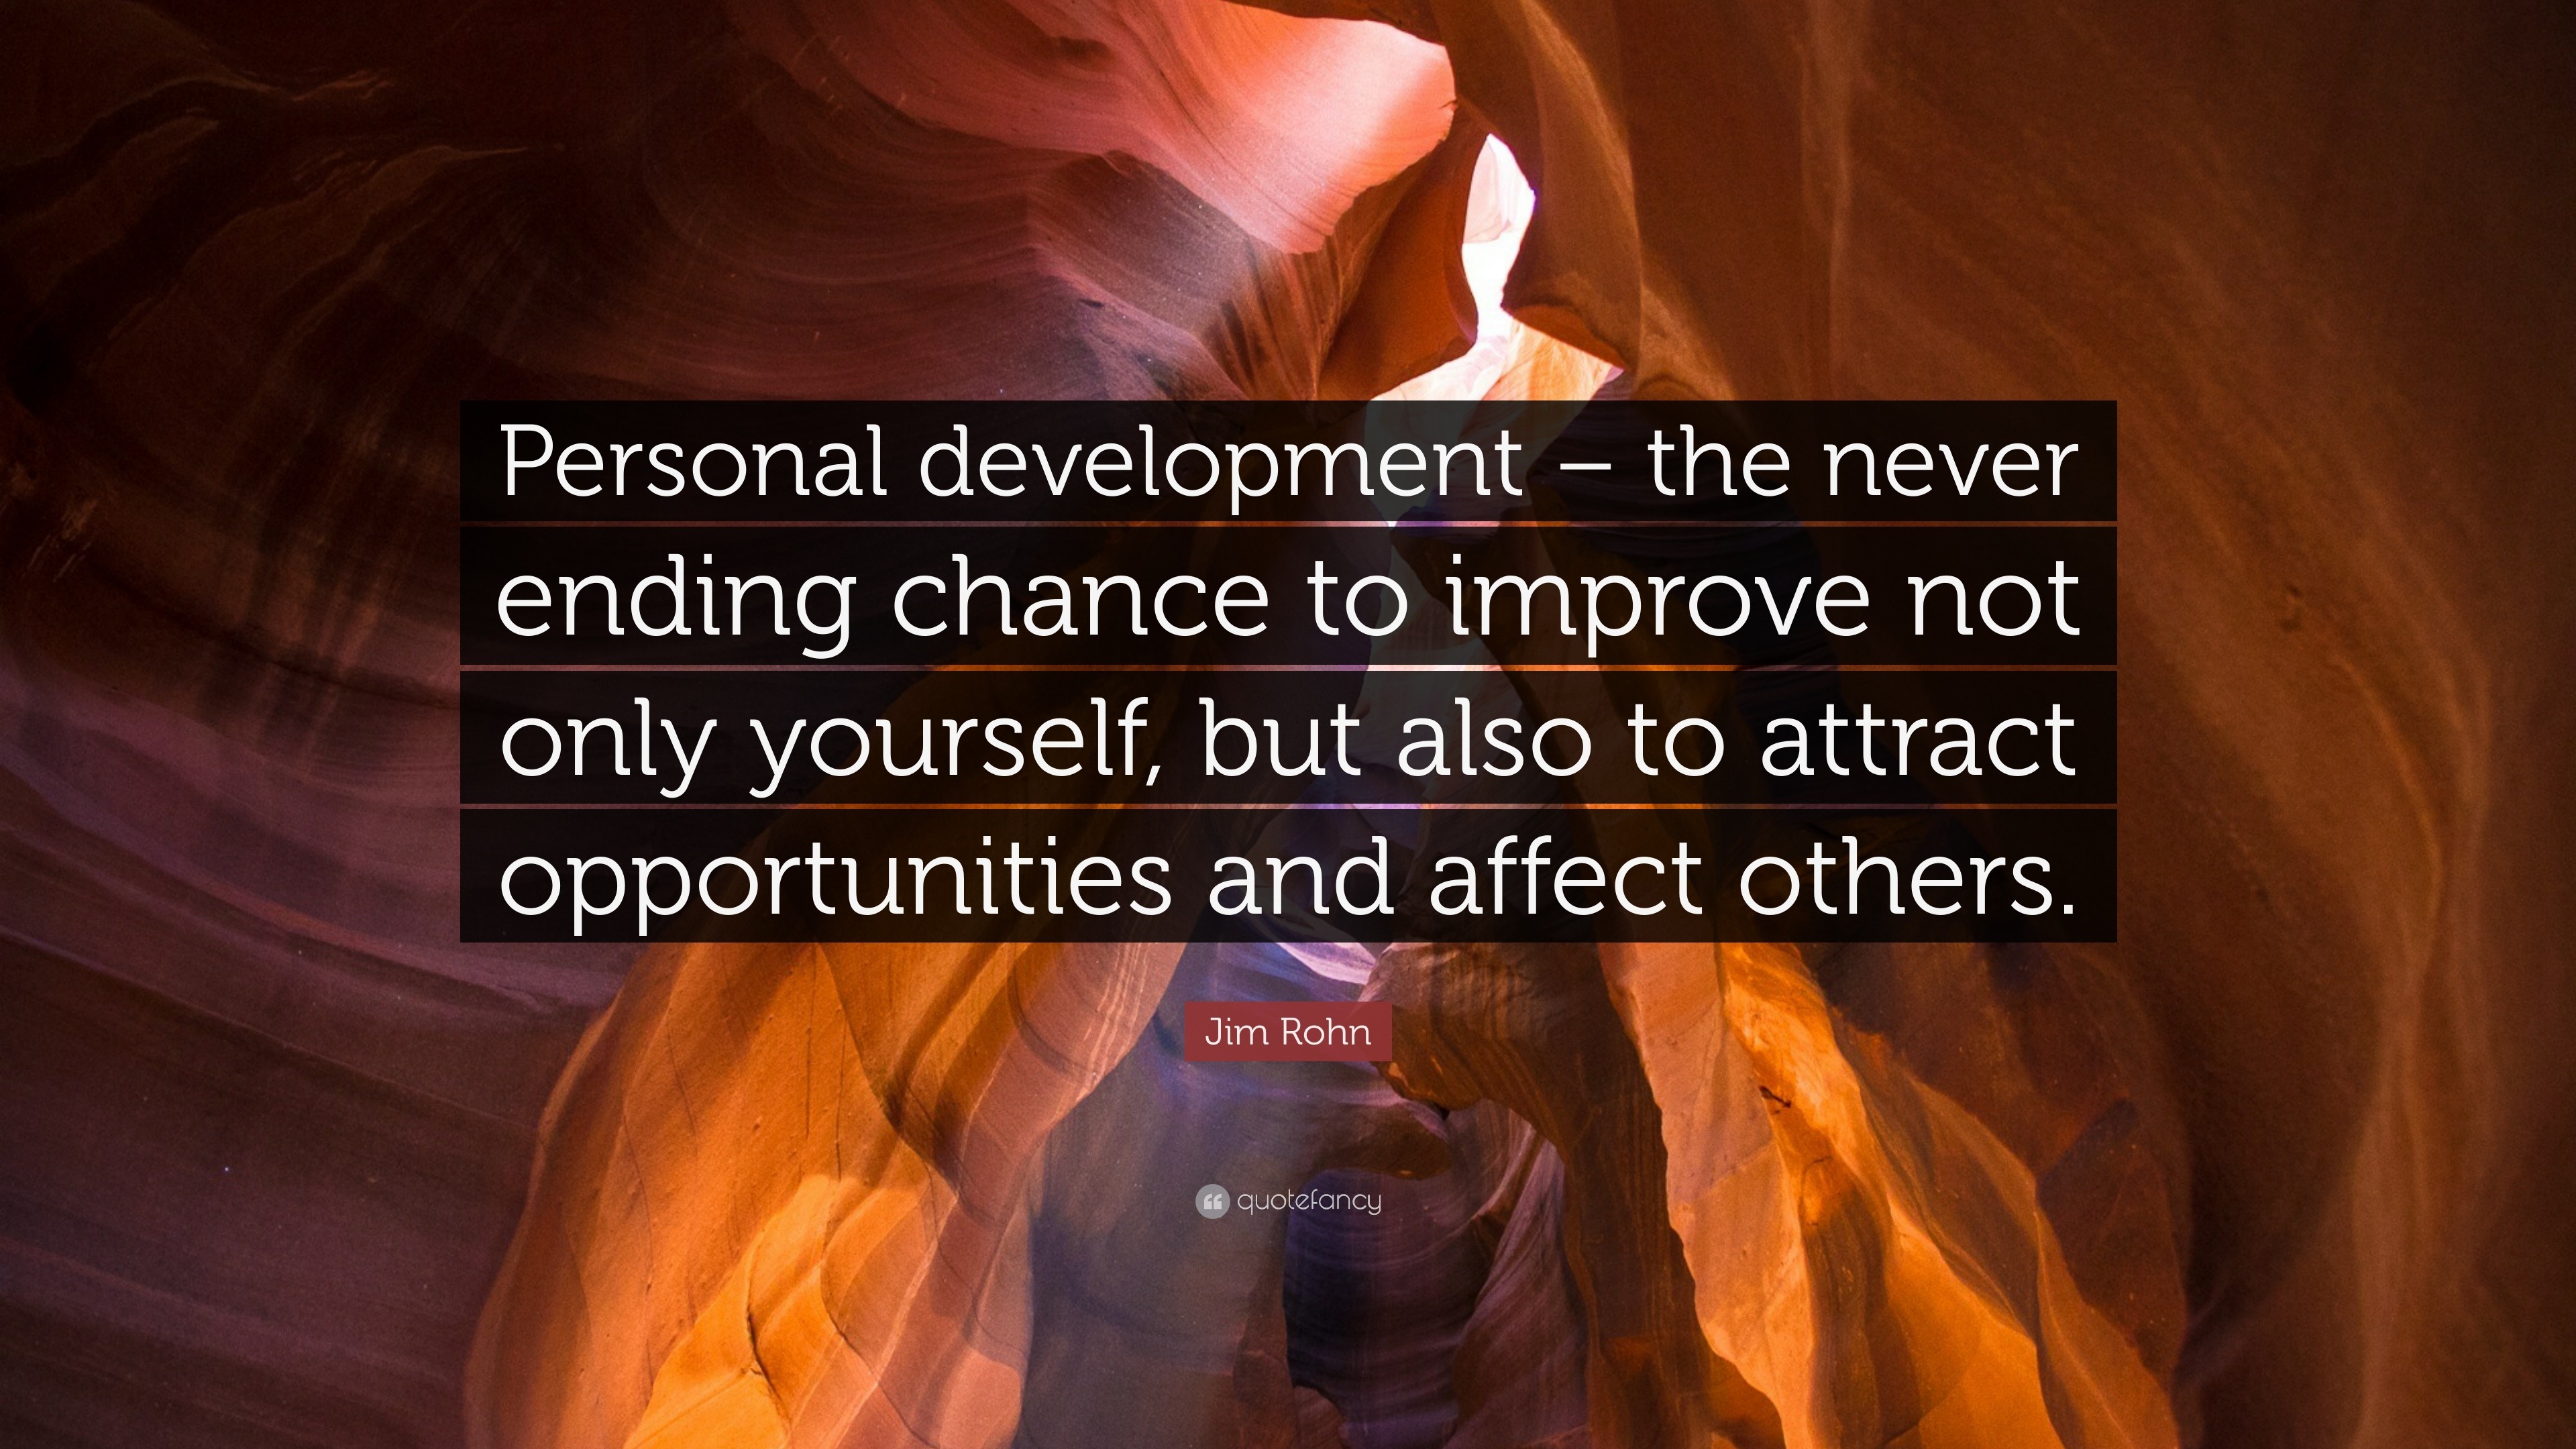 Jim Rohn Quote: “Personal development – the never ending chance to